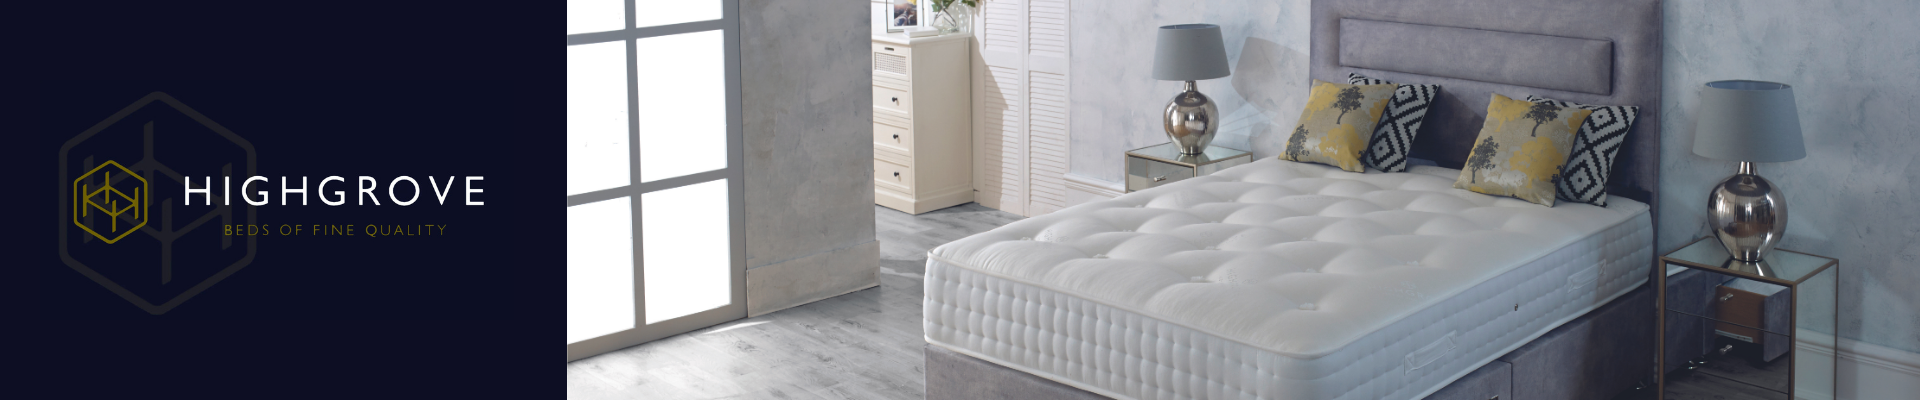 Highgrove Mattresses Collections Banner 